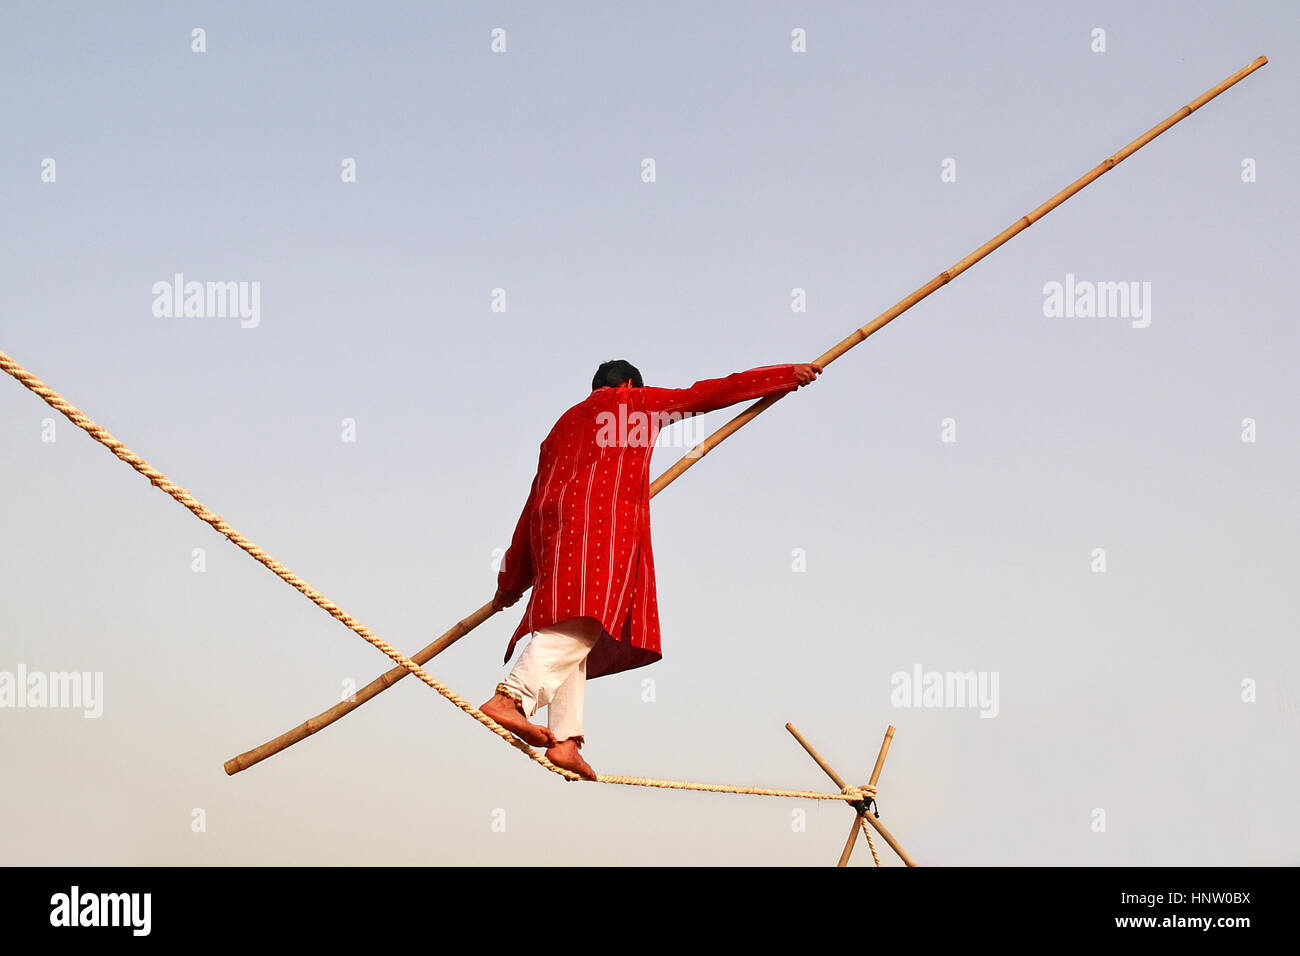 A man doing rope balancing holding a bamboo, wearing red and white clothes Stock Photo